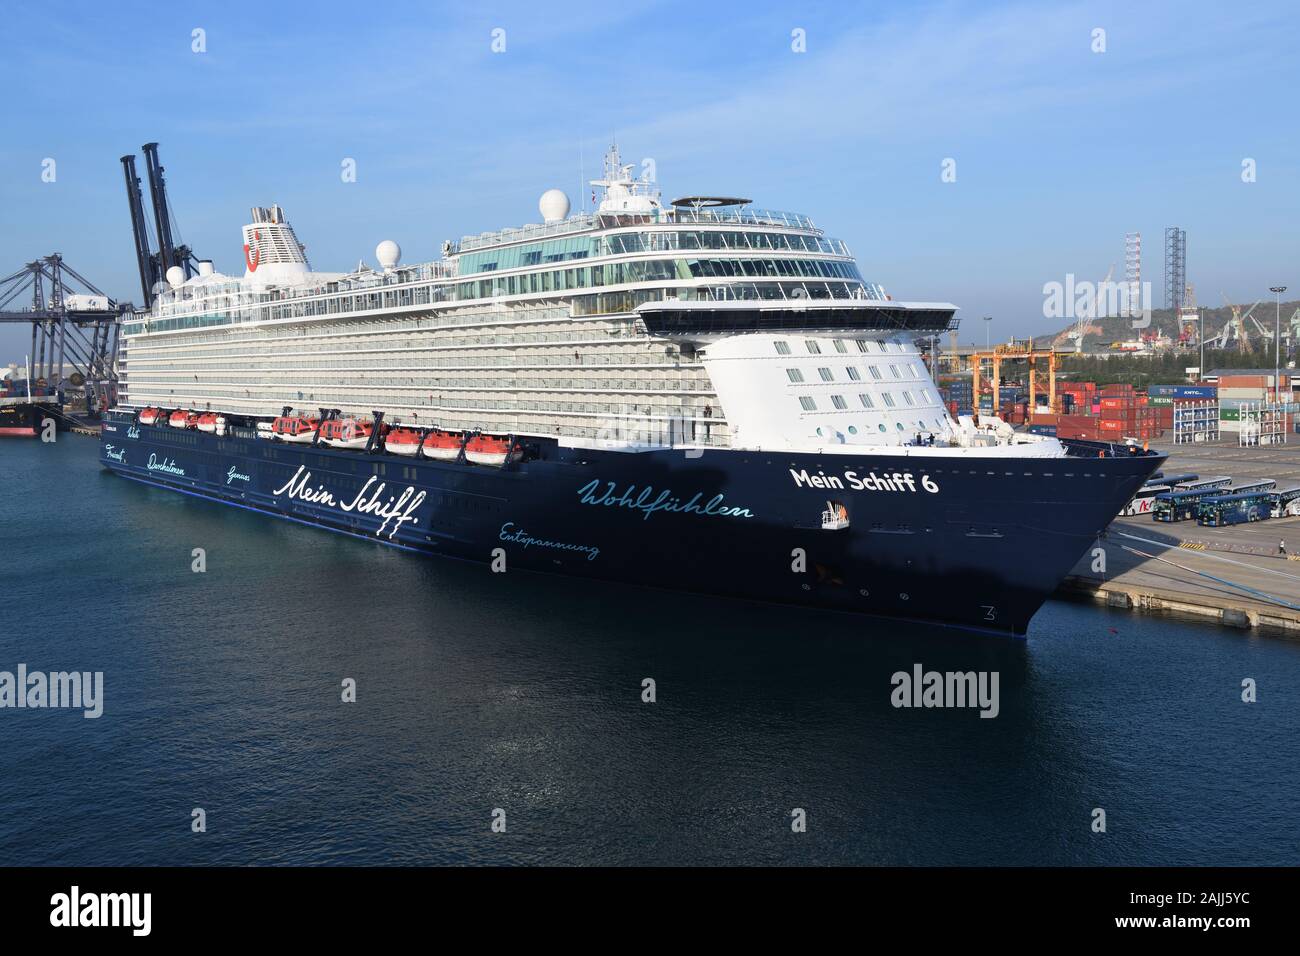 German operated, TUI cruises, 'Mein Schiff 6' in port at Laem Chabang, Thailand Stock Photo